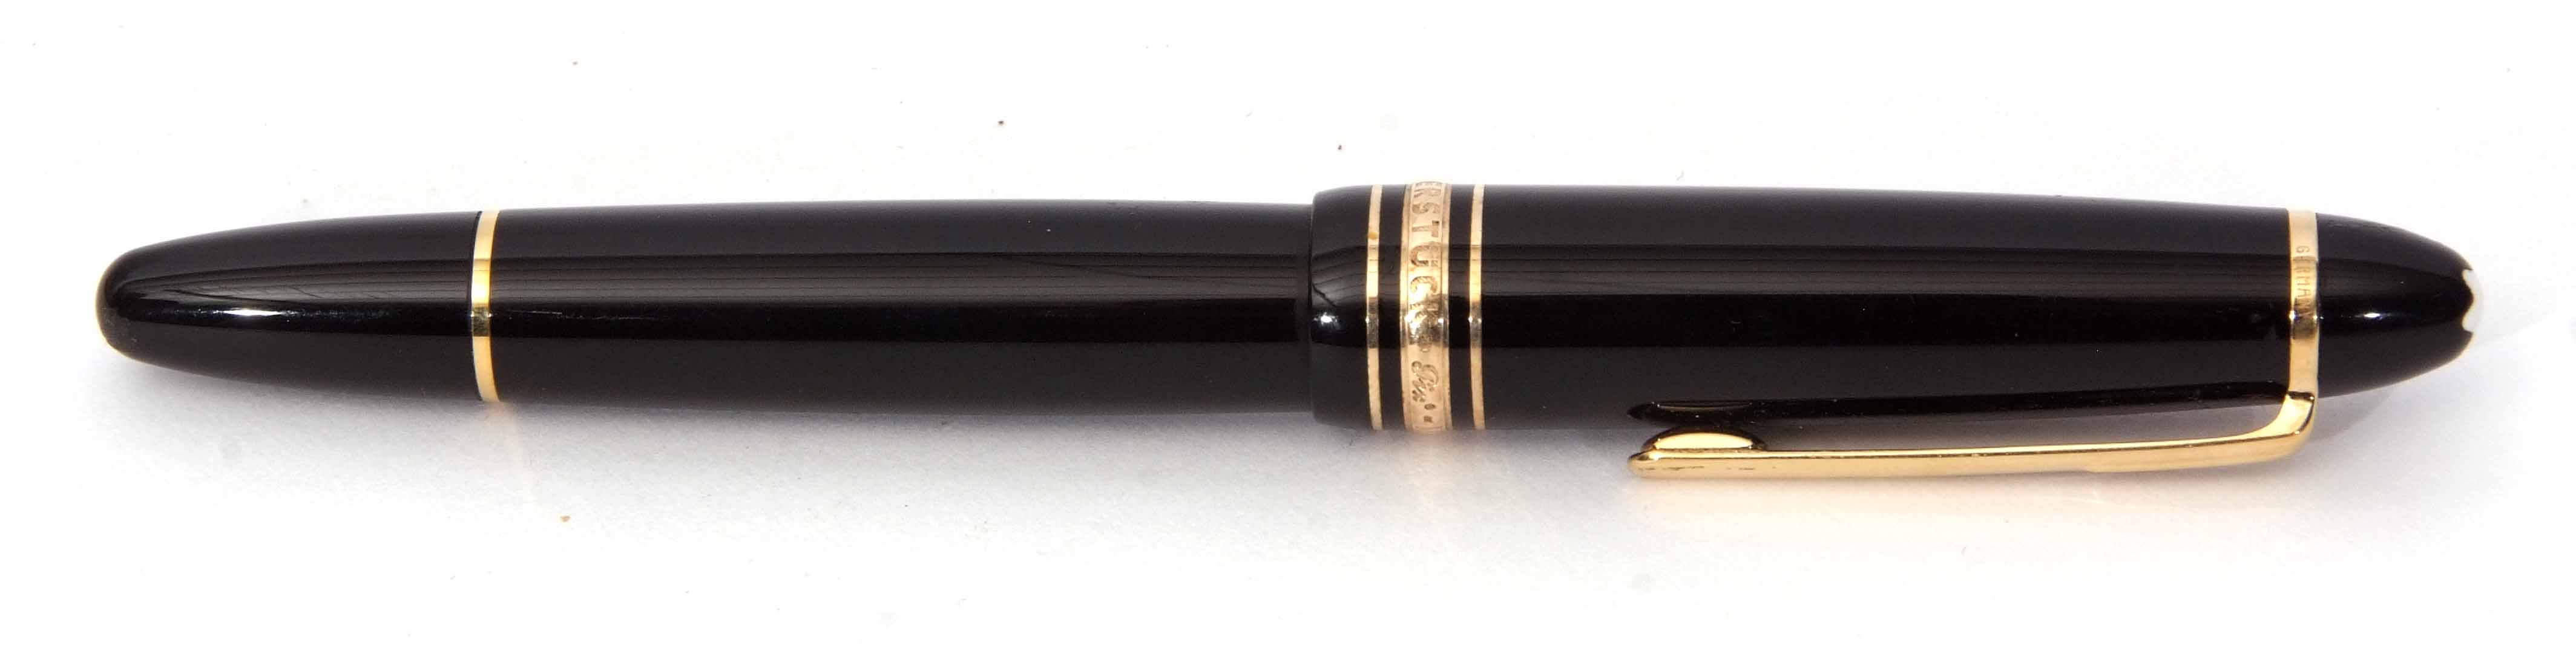 Late 20th century cased fountain pen, Mont Blanc, 4810, of typical cylindrical form with screw - Image 2 of 3